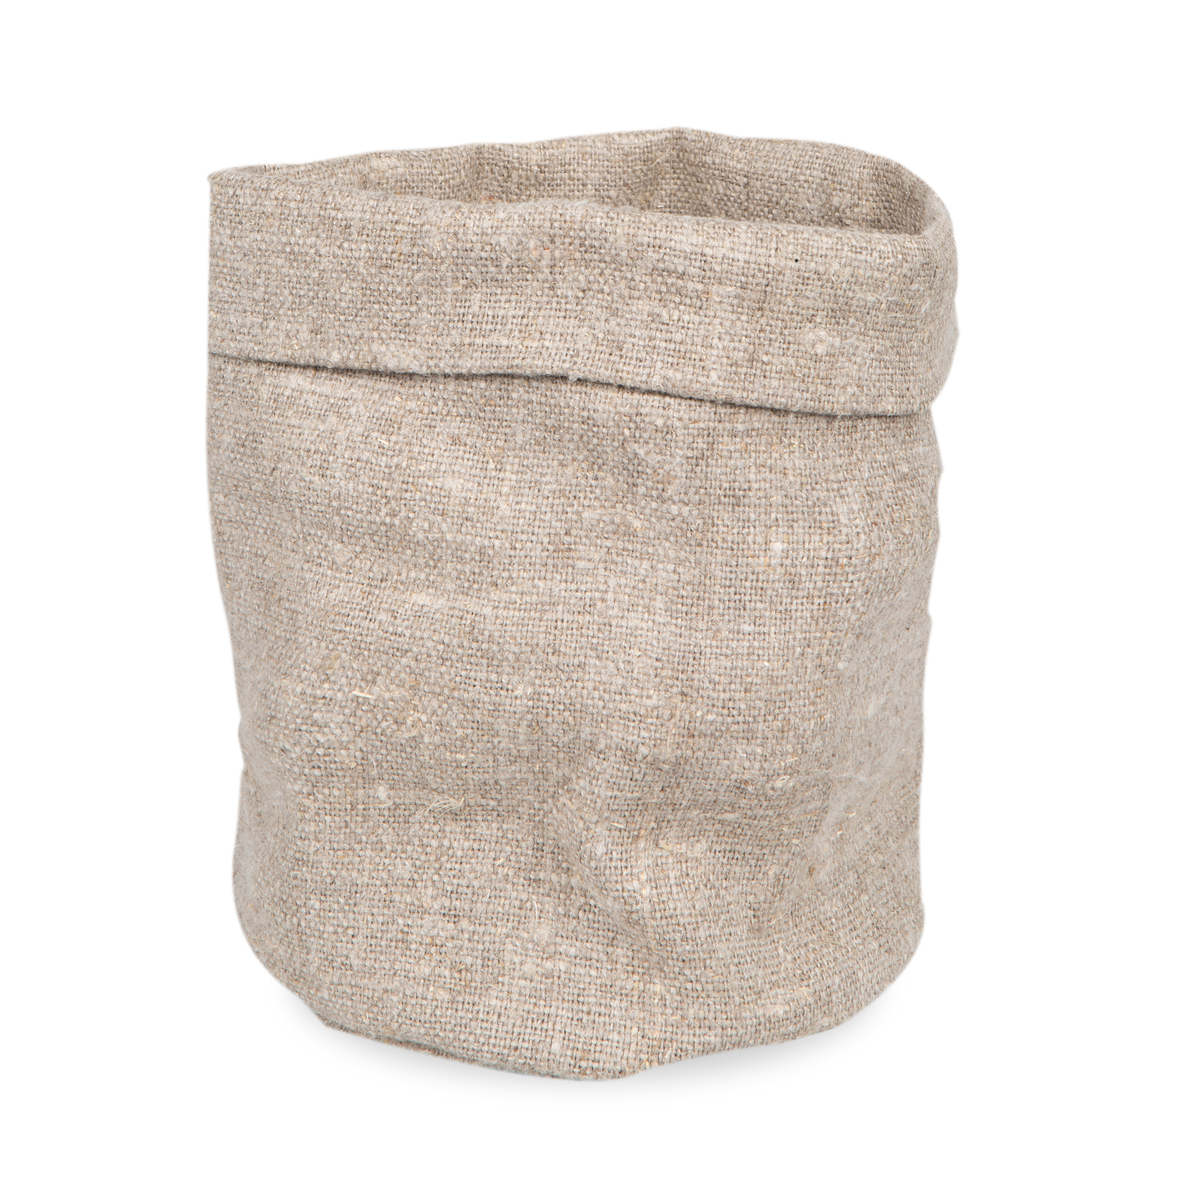 This simple style rough linen basket holds its shape.